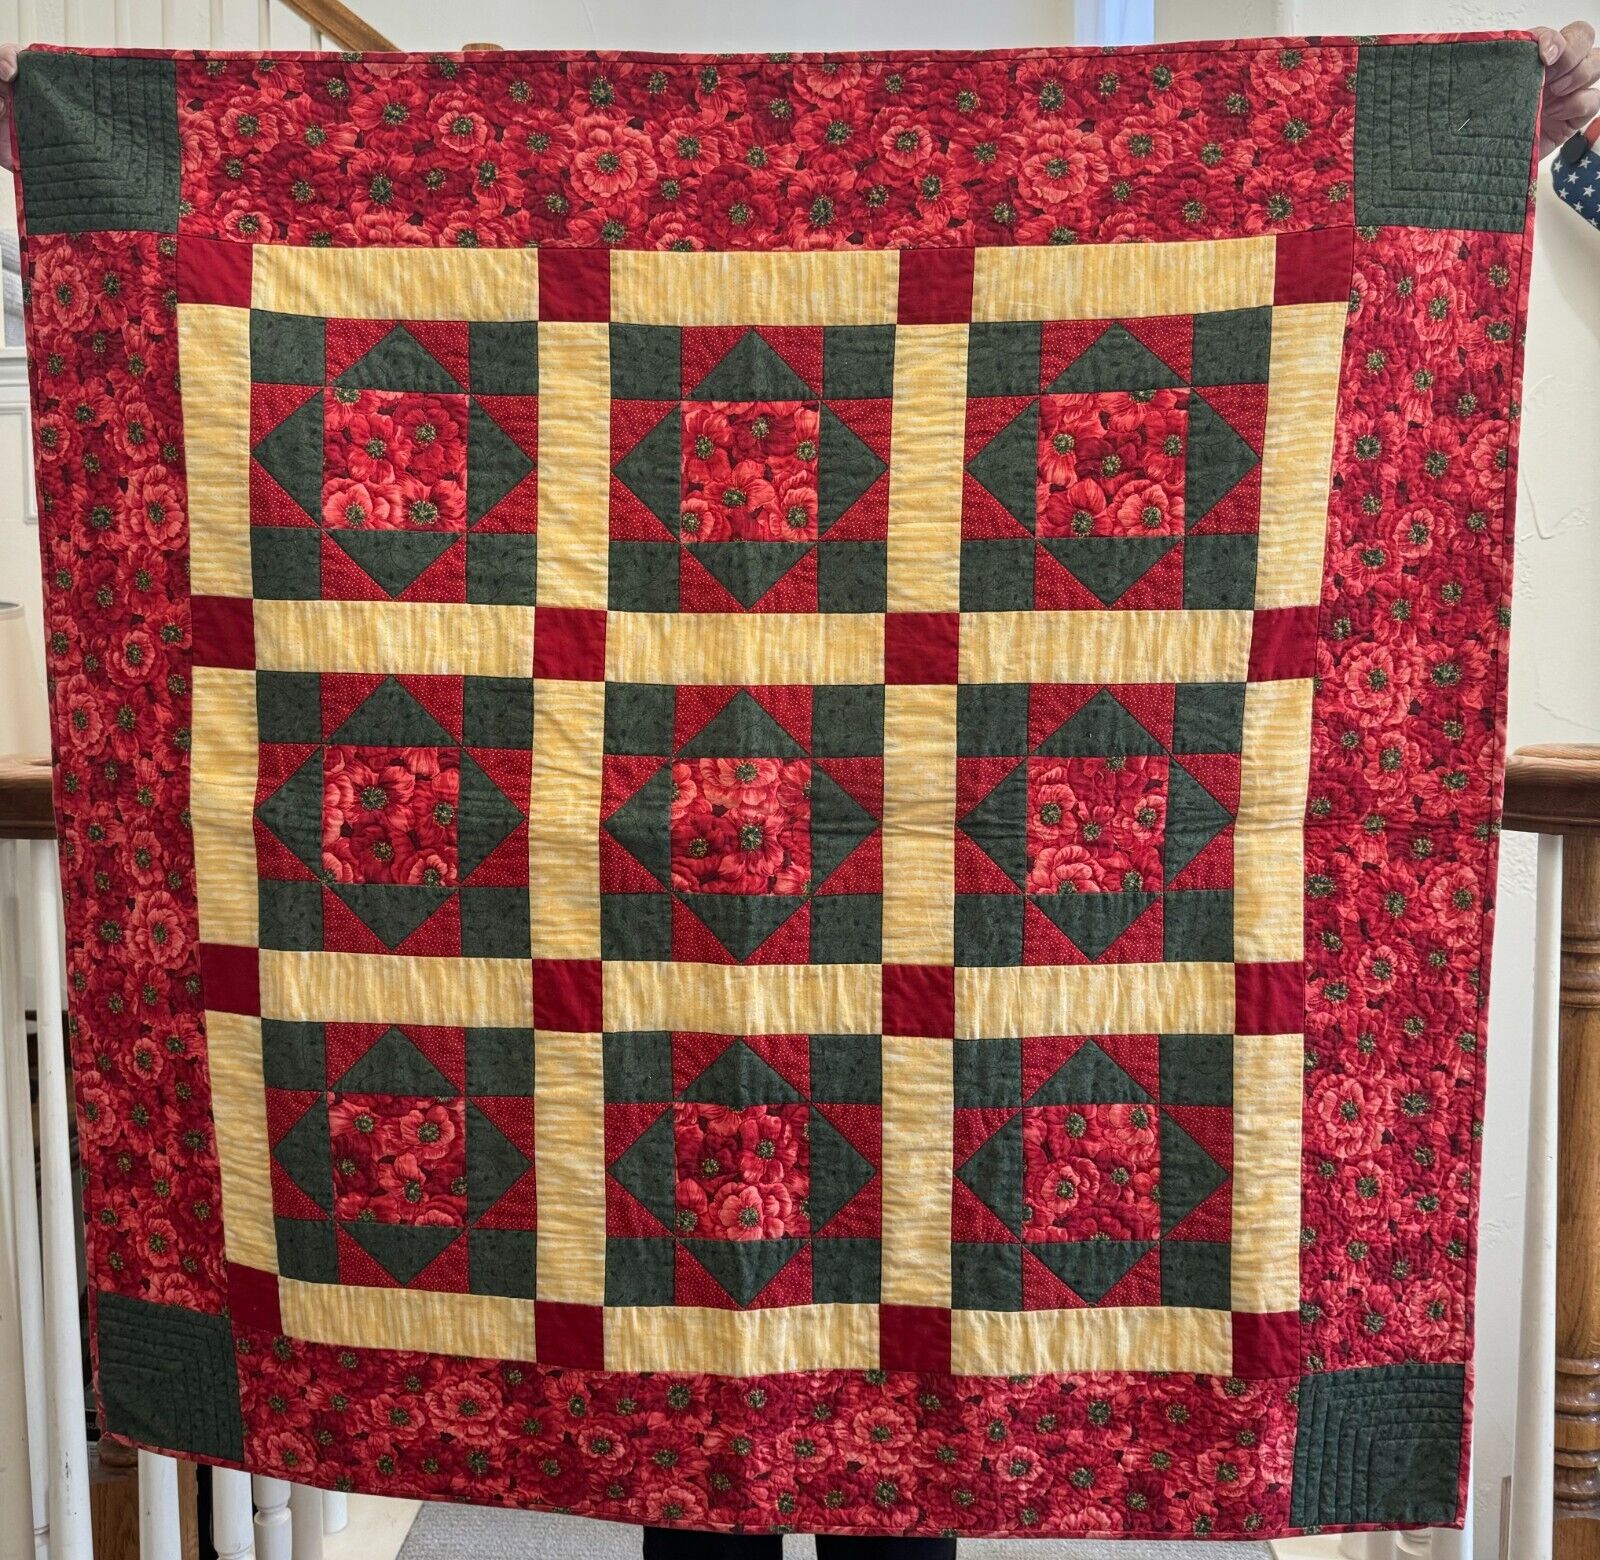 Red Floral Quilt